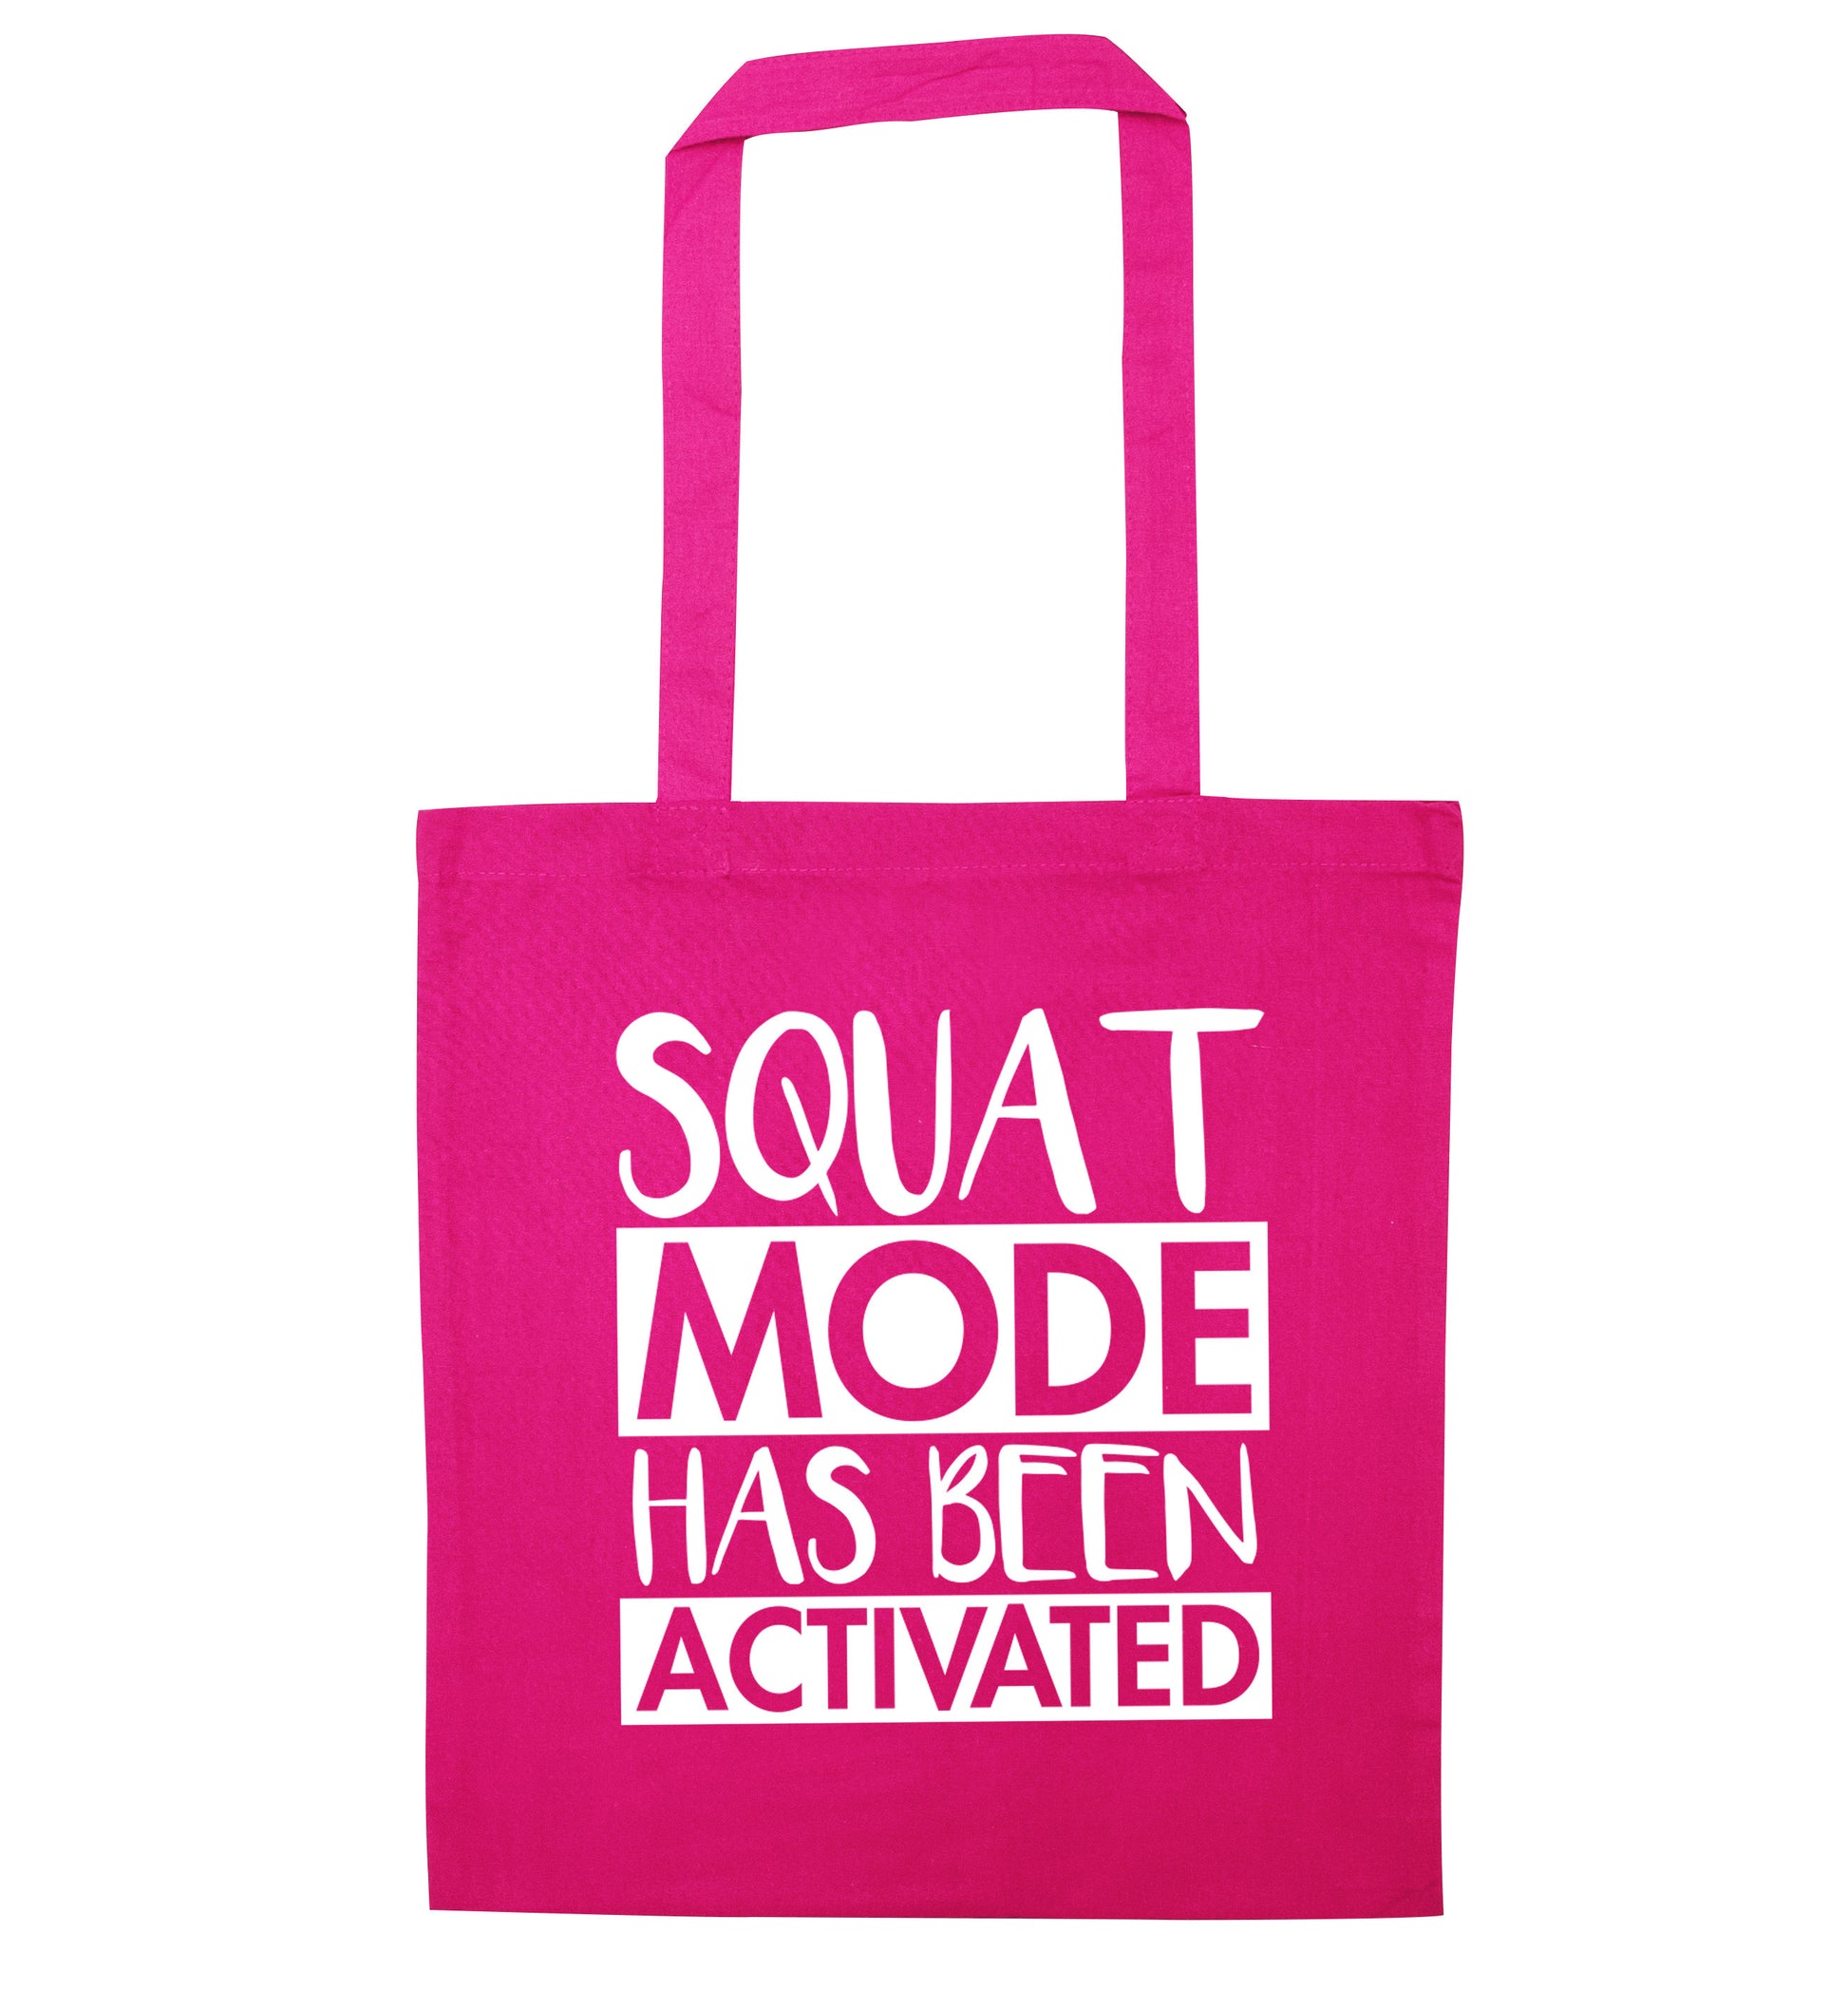 Squat mode activated pink tote bag